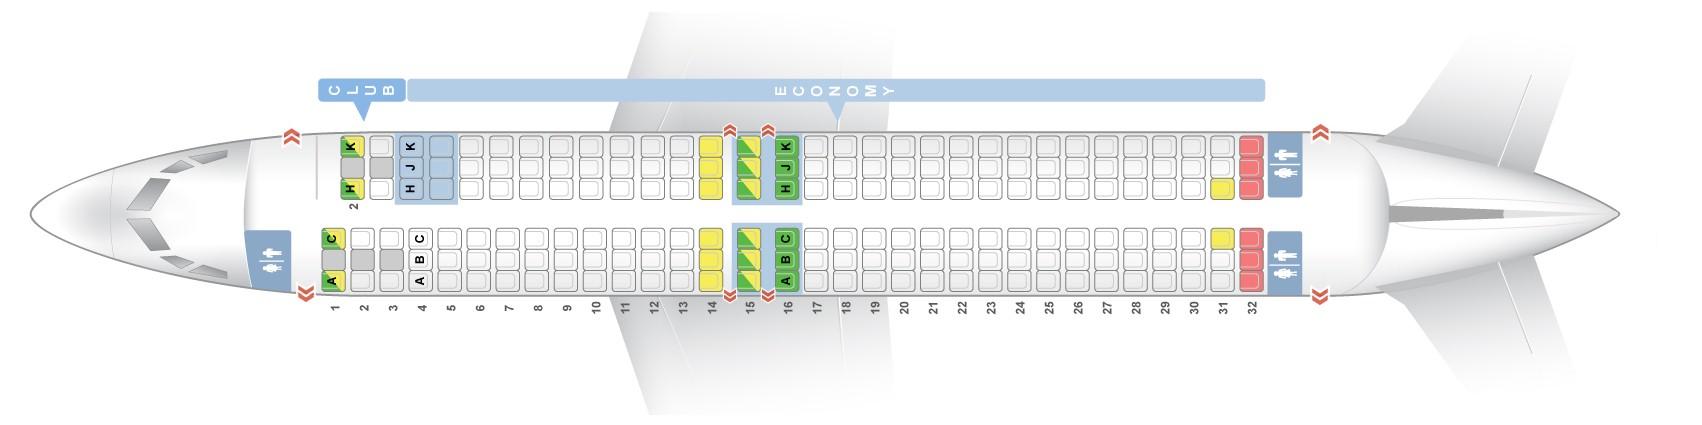 Seat map Boeing 737-800 Air Transat. Best seats in the plane